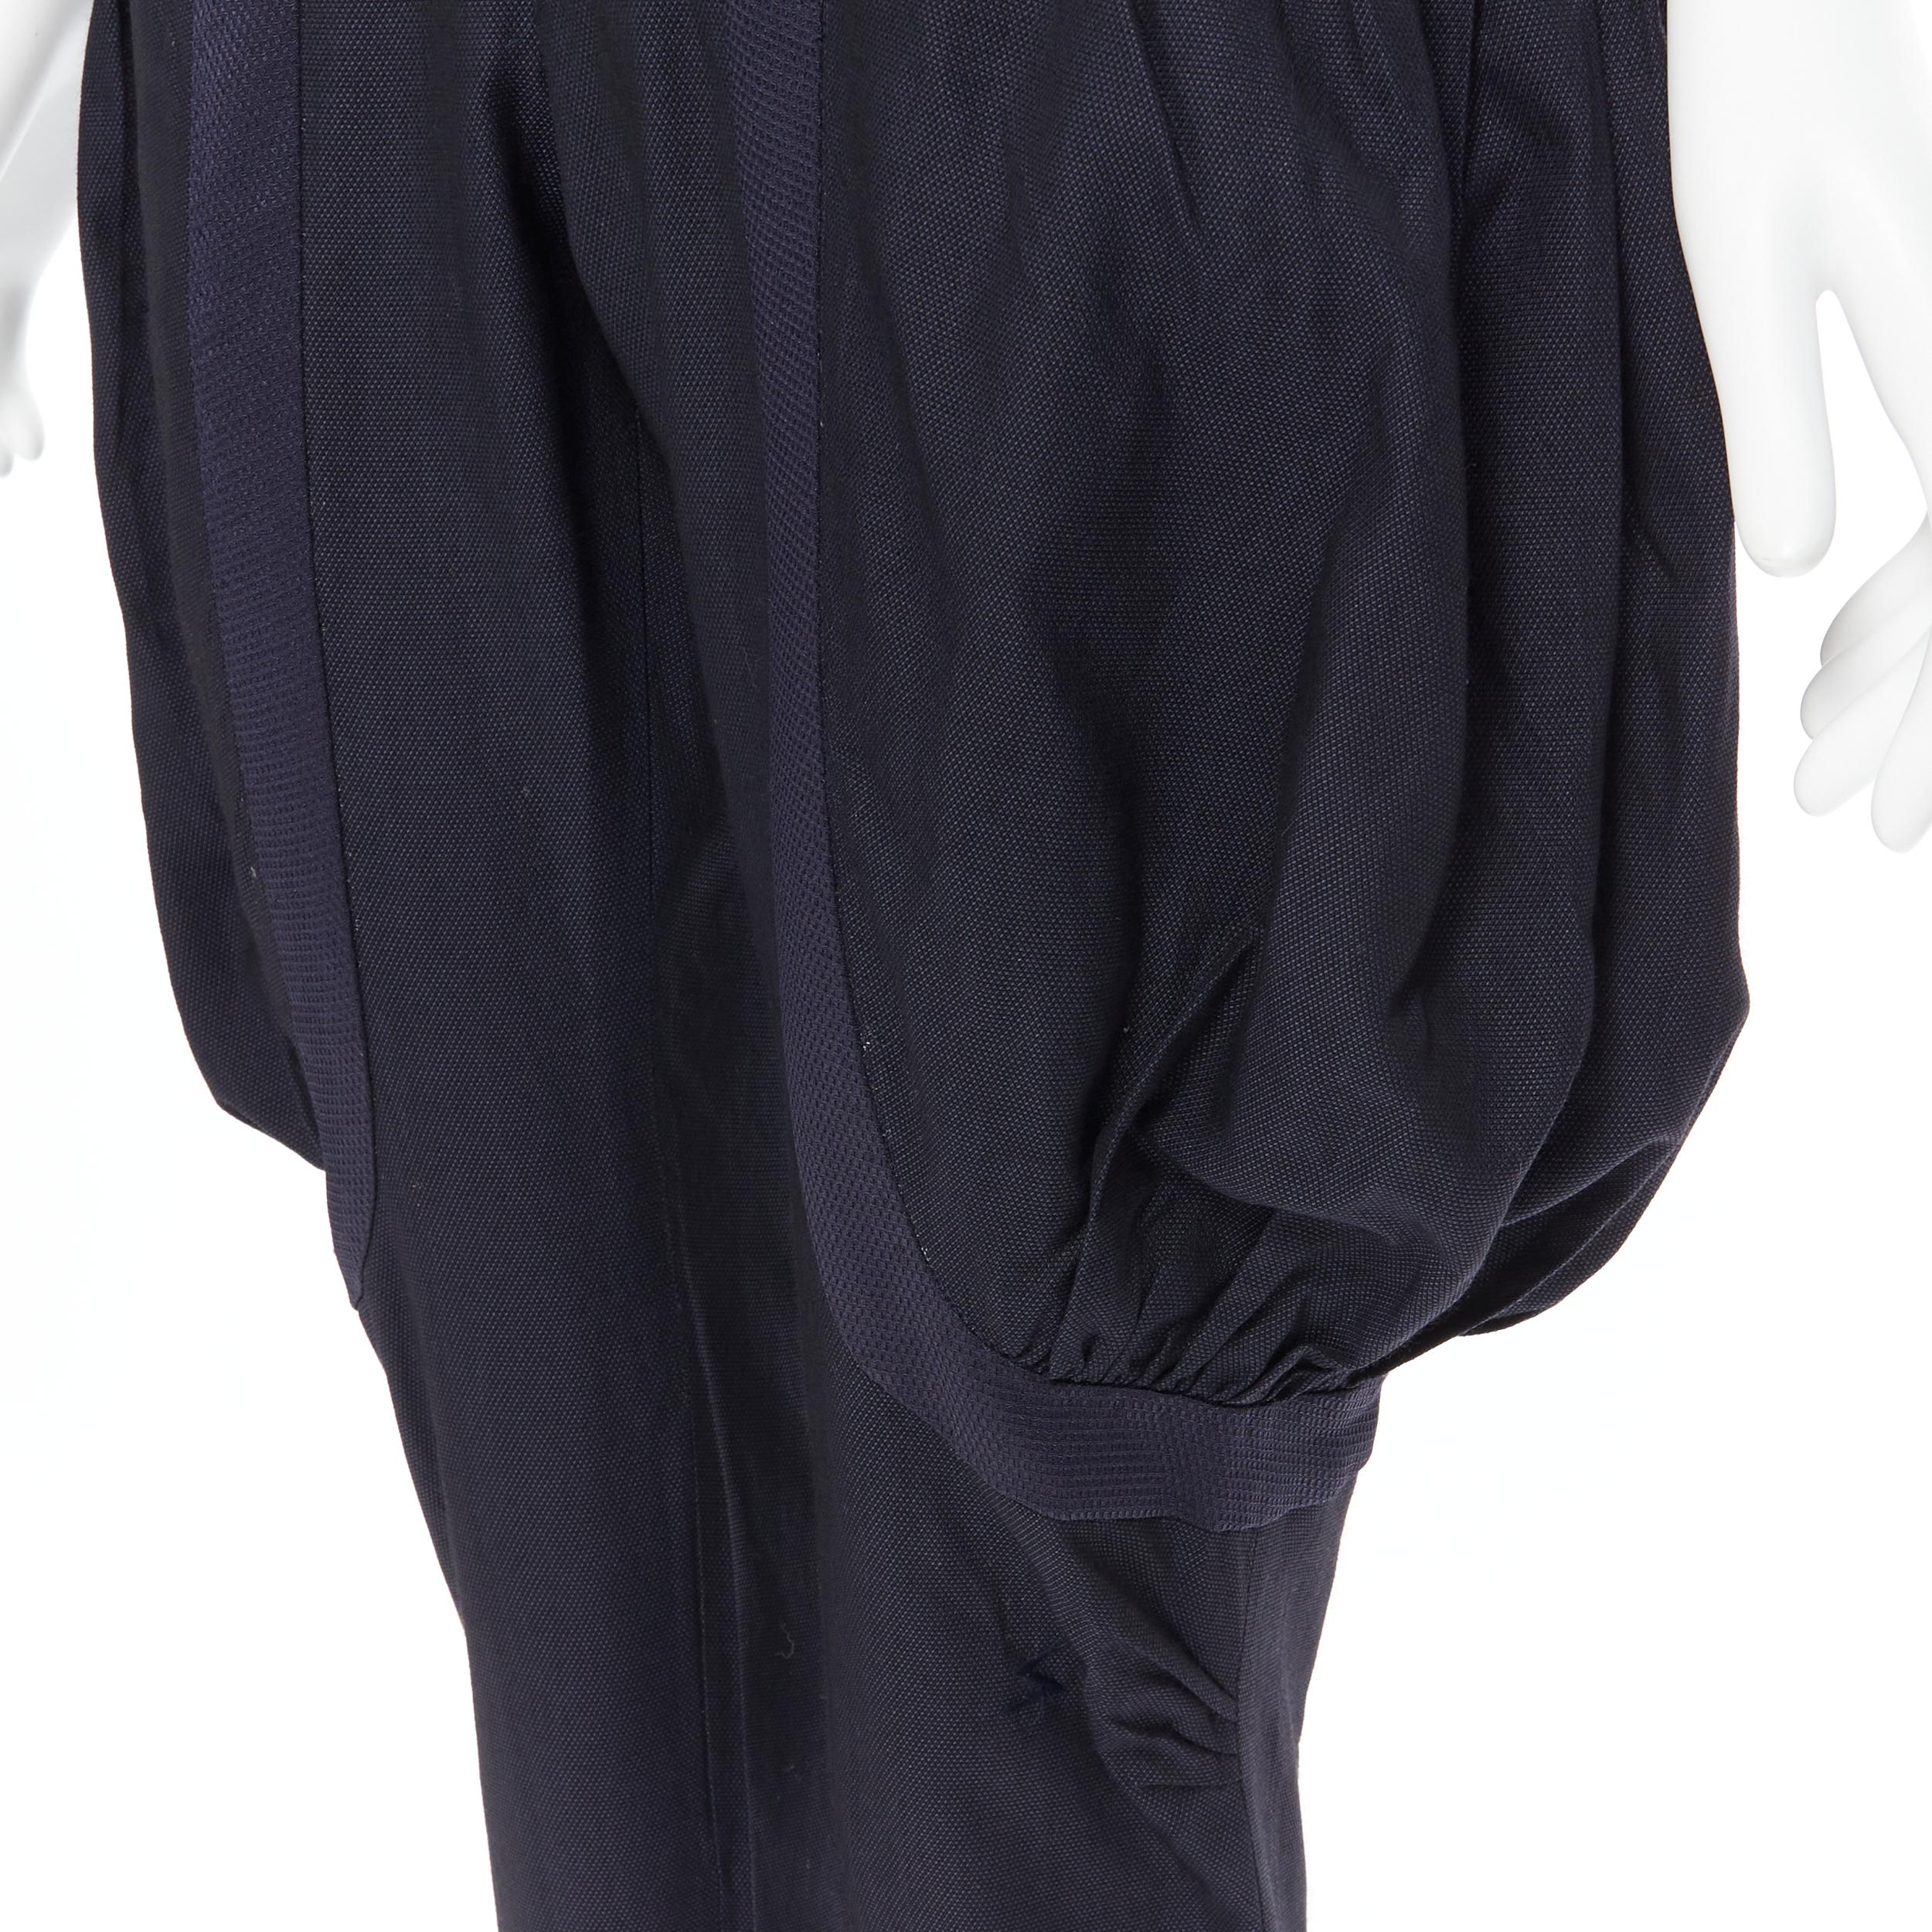 UNDERCOVER navy wool silk pleated exaggerated pockets jodphur riding pants M 3